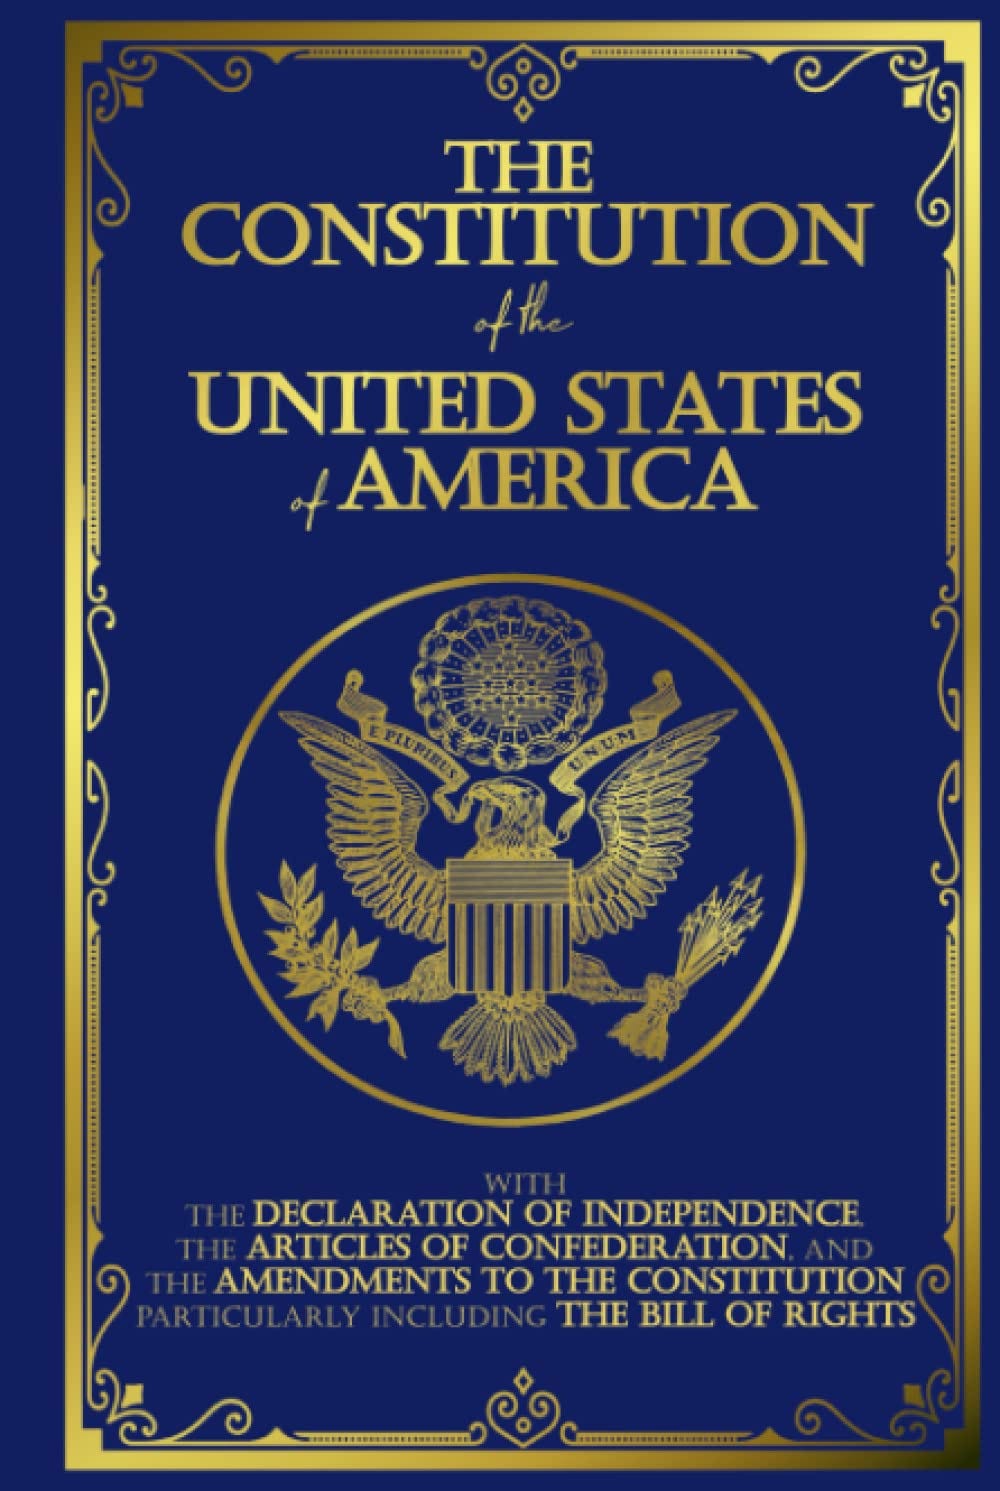 The Declaration of Independence and The Constitution of The United States of America